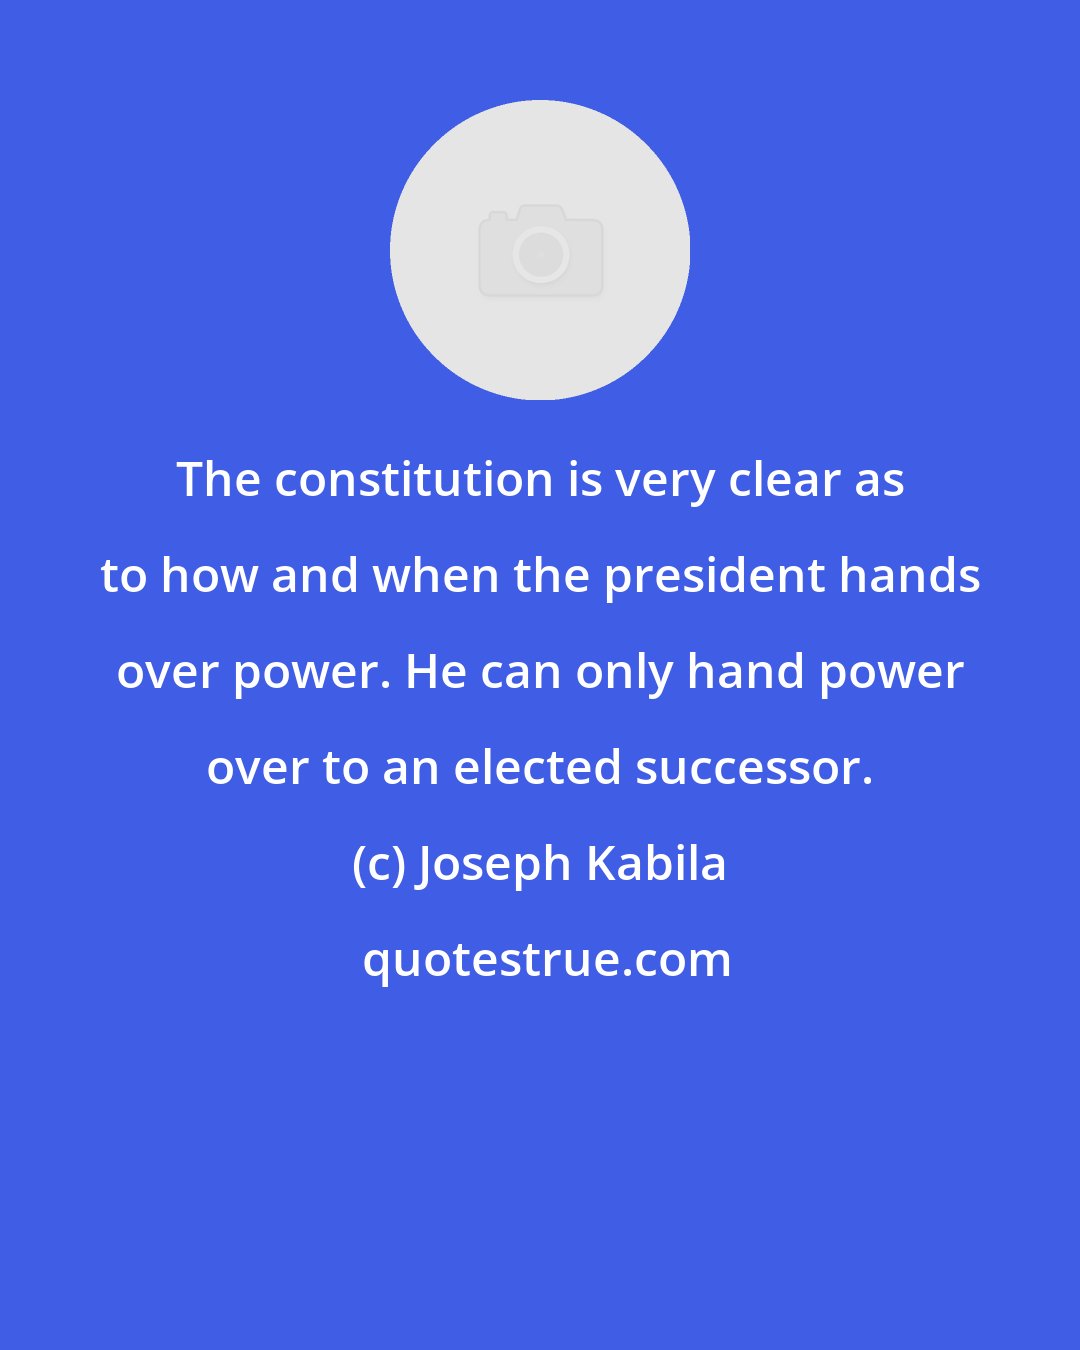 Joseph Kabila: The constitution is very clear as to how and when the president hands over power. He can only hand power over to an elected successor.